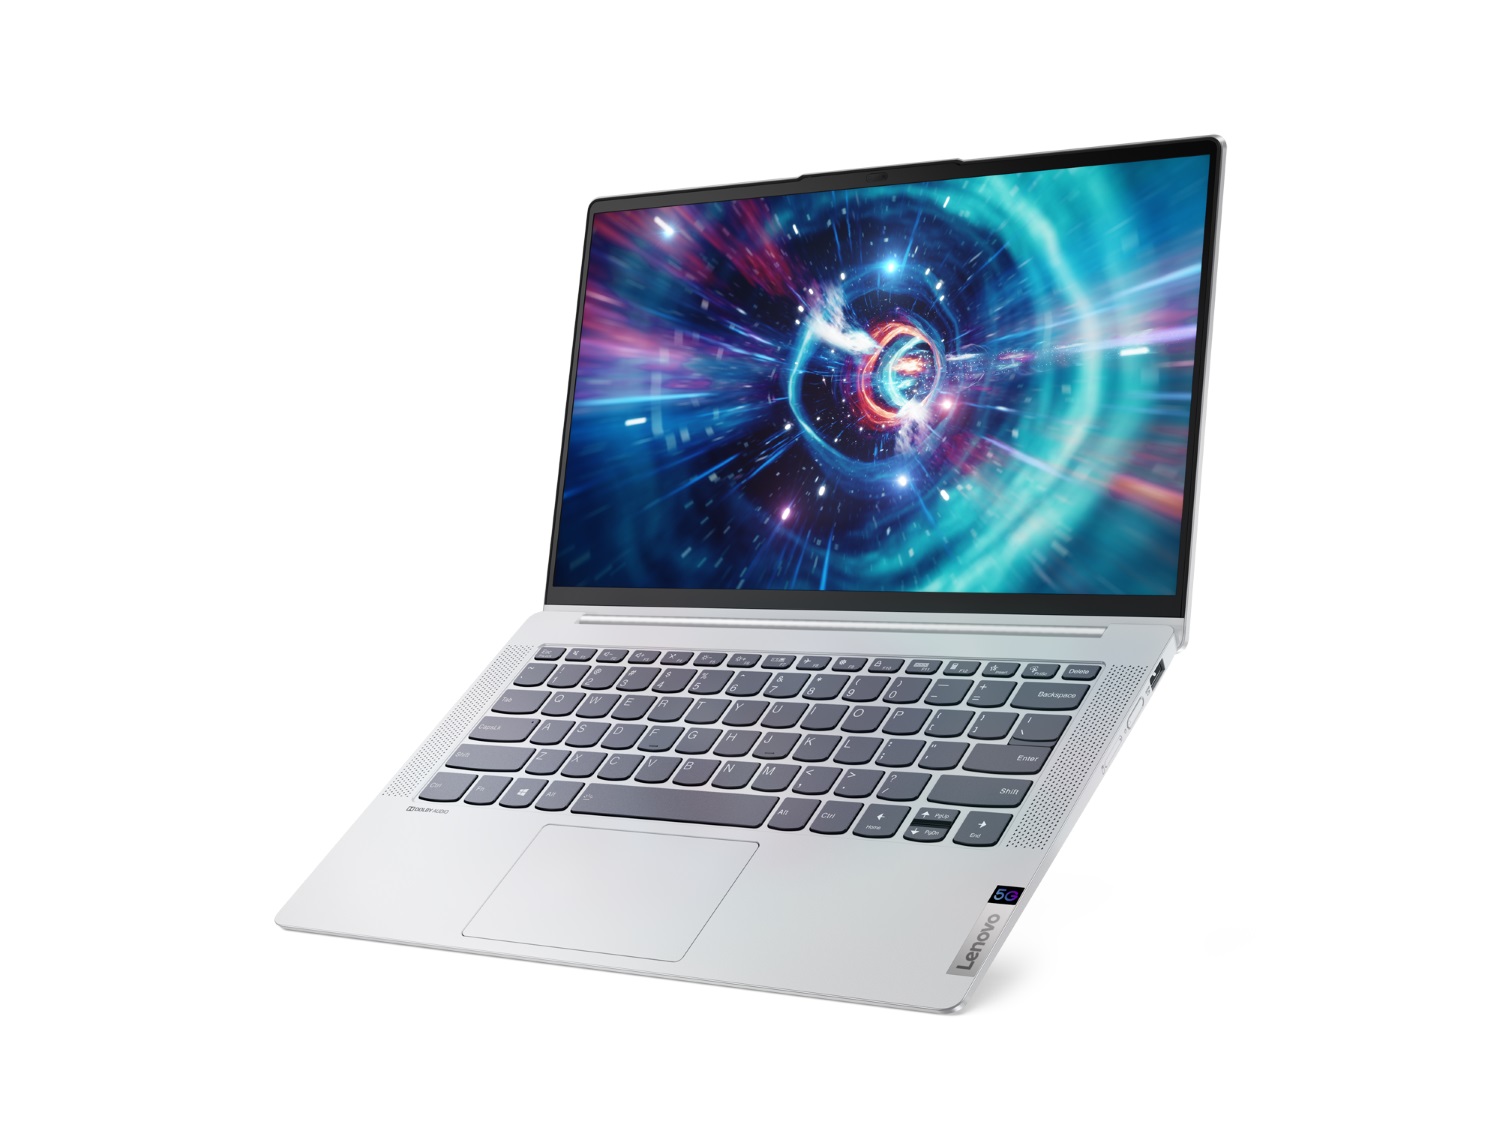 Lenovo IdeaPad 5G, open and facing left, floating